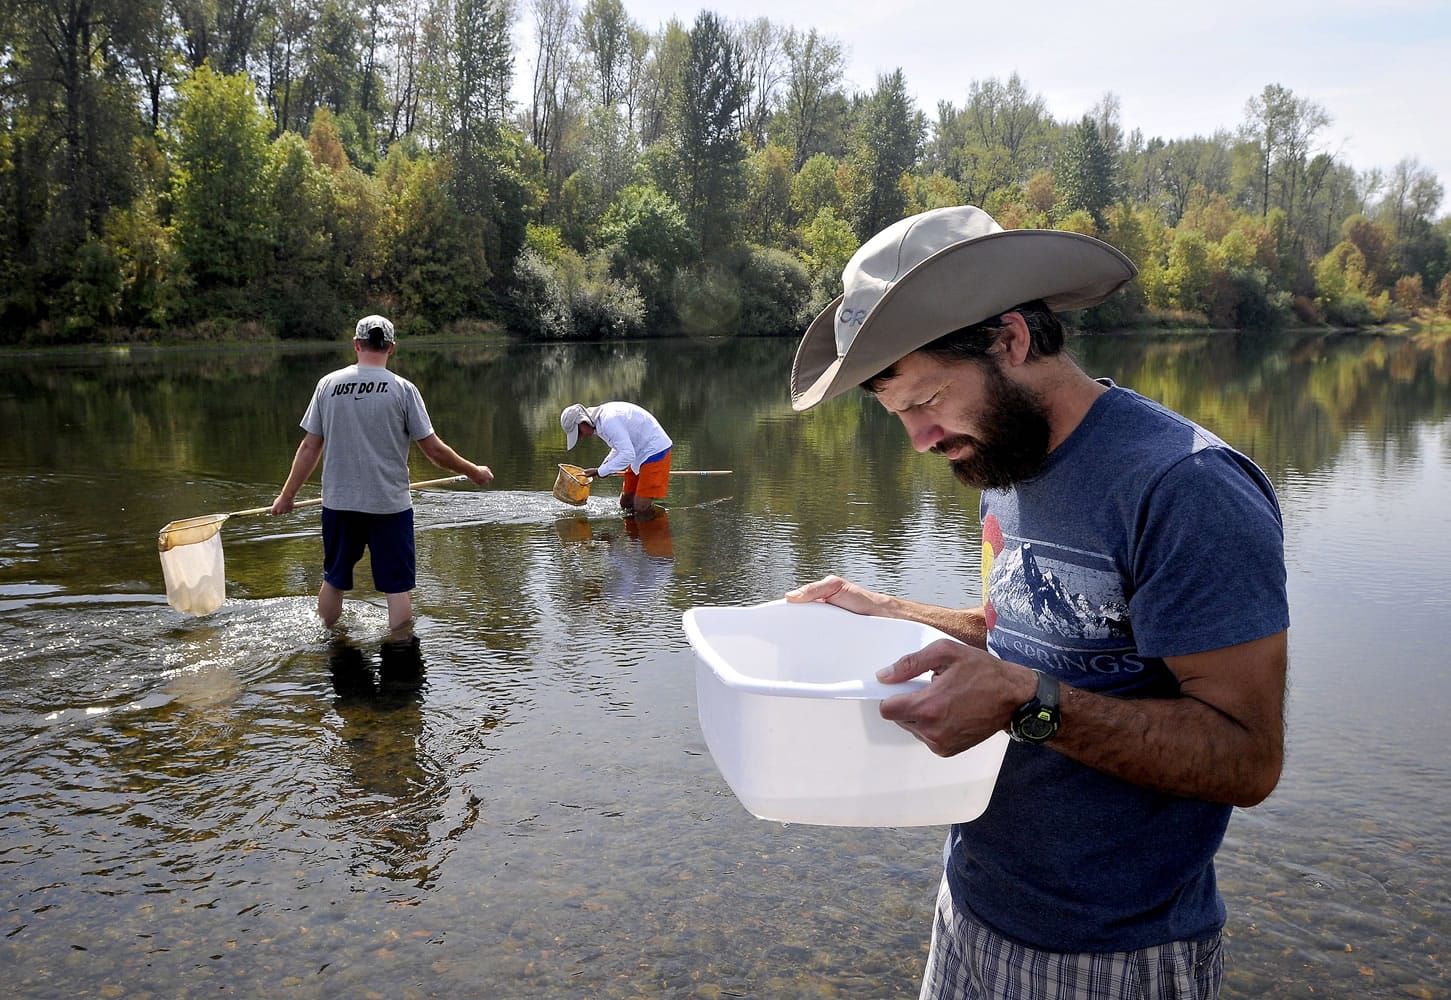 ADVANCE FOR WEEKEND EDITIONS, SEPT. 5-6 - In this photo taken Thursday, Aug. 27, 2015, Nathan Harris, a fourth grade teacher at Adams Elementary School, looks at macroinvertebrates at Tripp Island along the Willamette River near Corvallis, Ore. Harris was one of the teachers participating in an education program coordinated by the Institute of Applied Ecology.